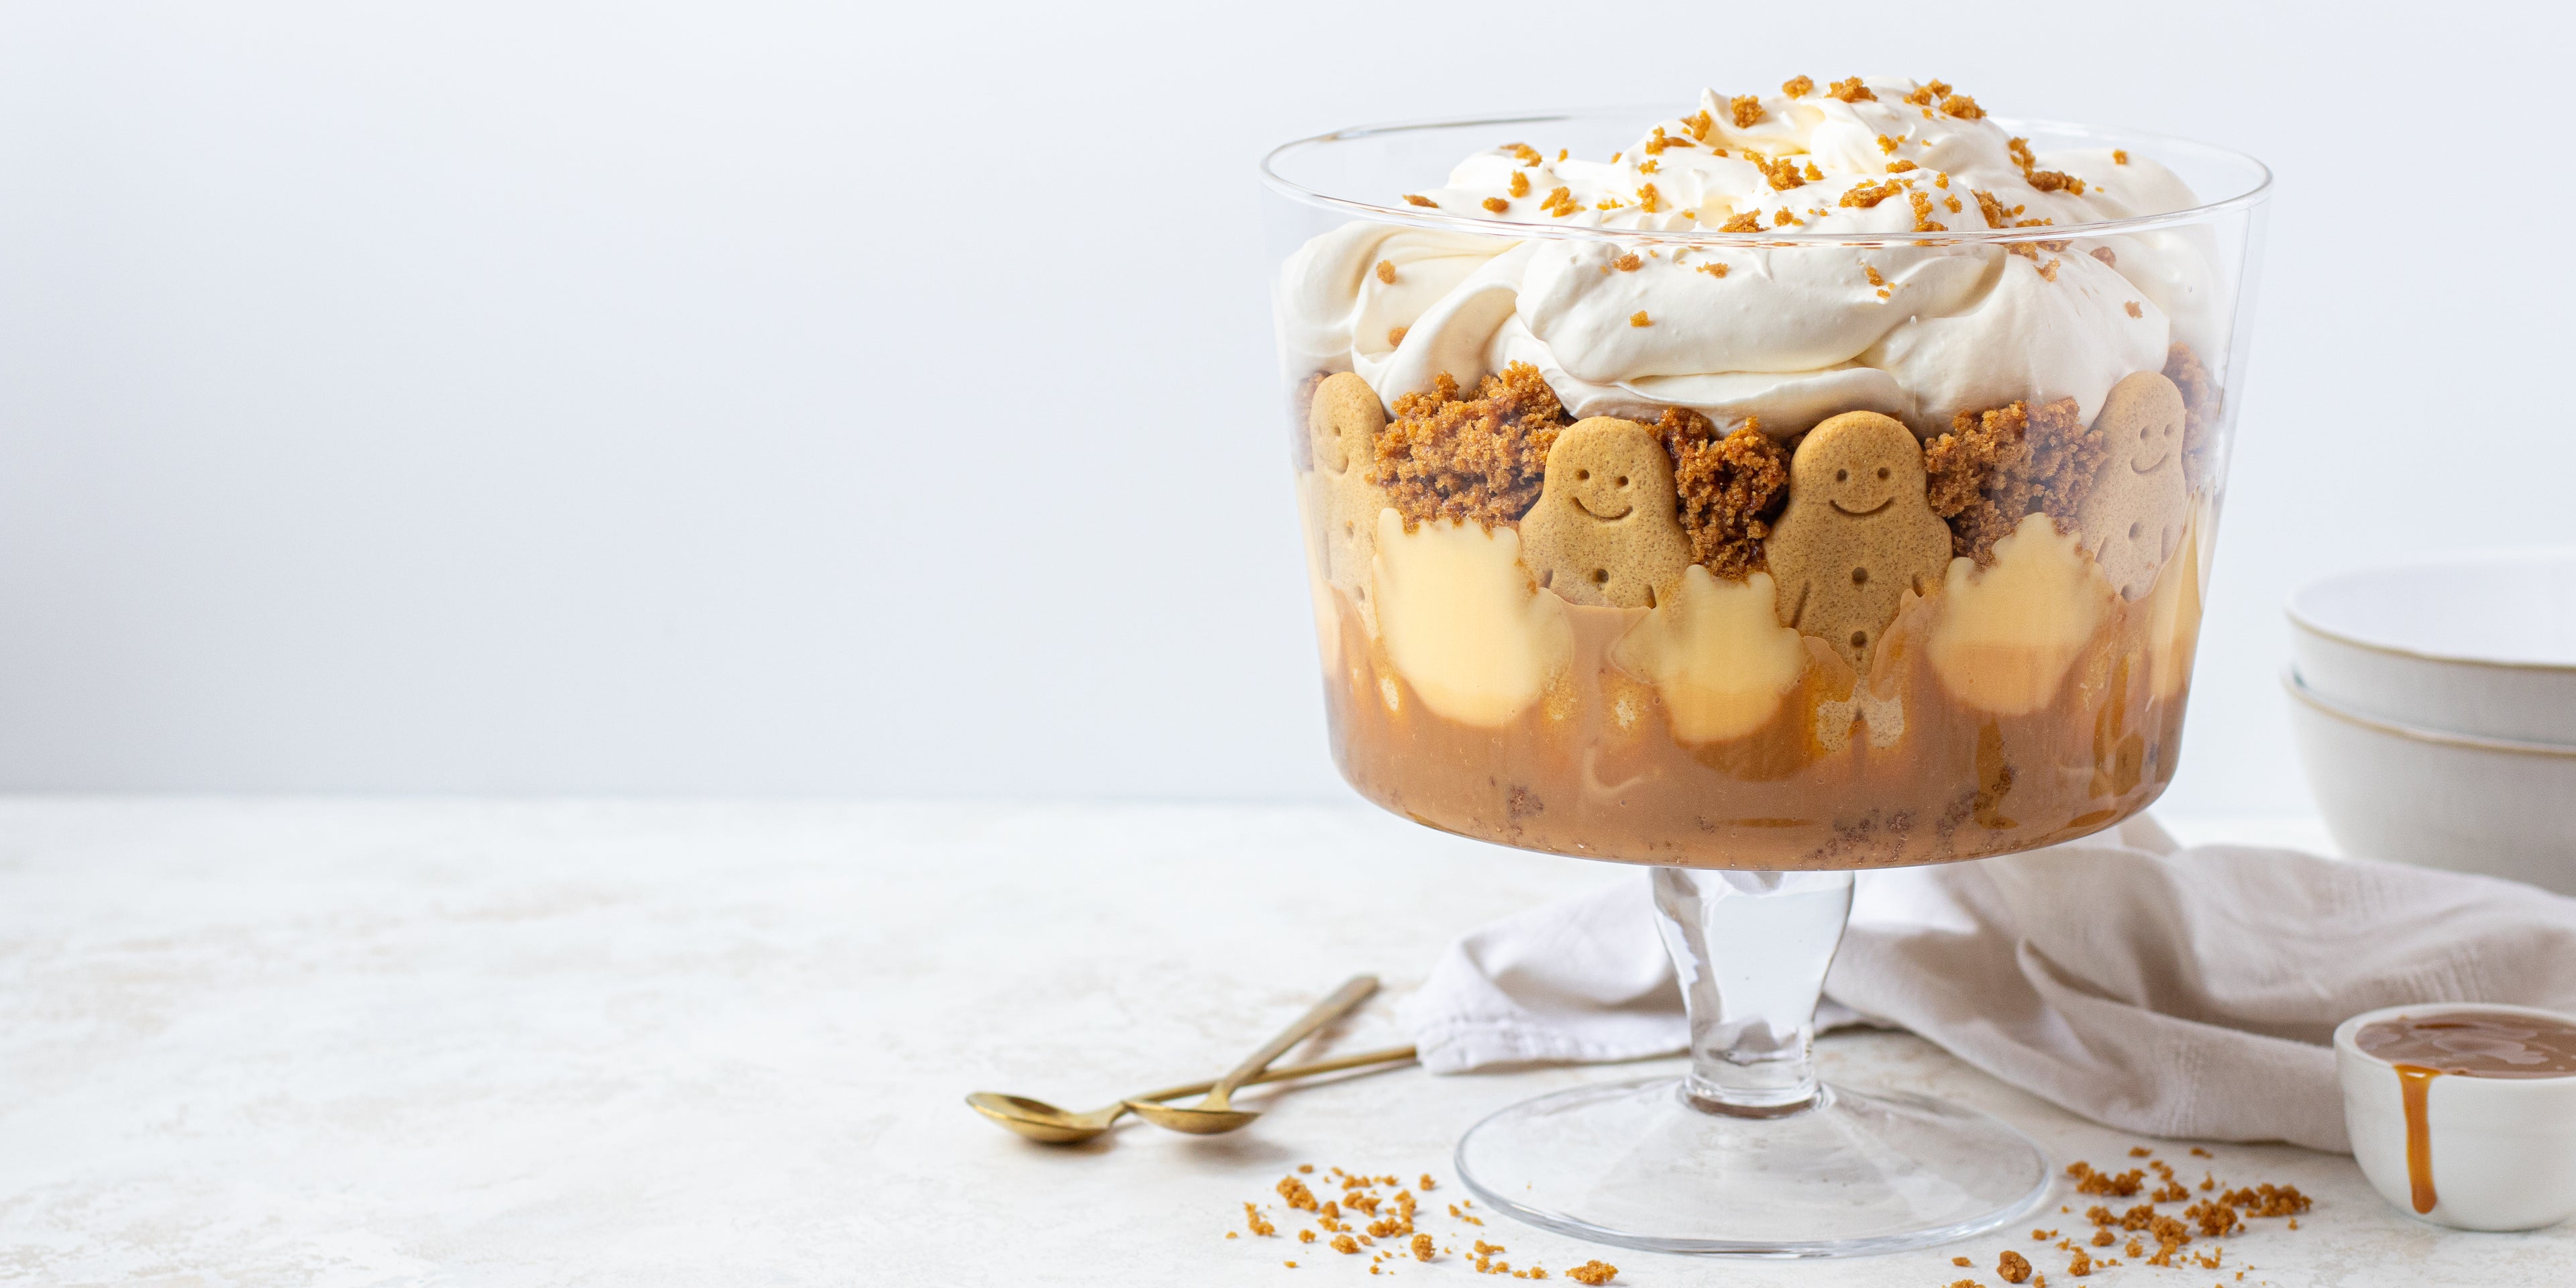 Gingerbread trifle with gingerbread men decorated around the trifle bowl, with two spoons ready to serve